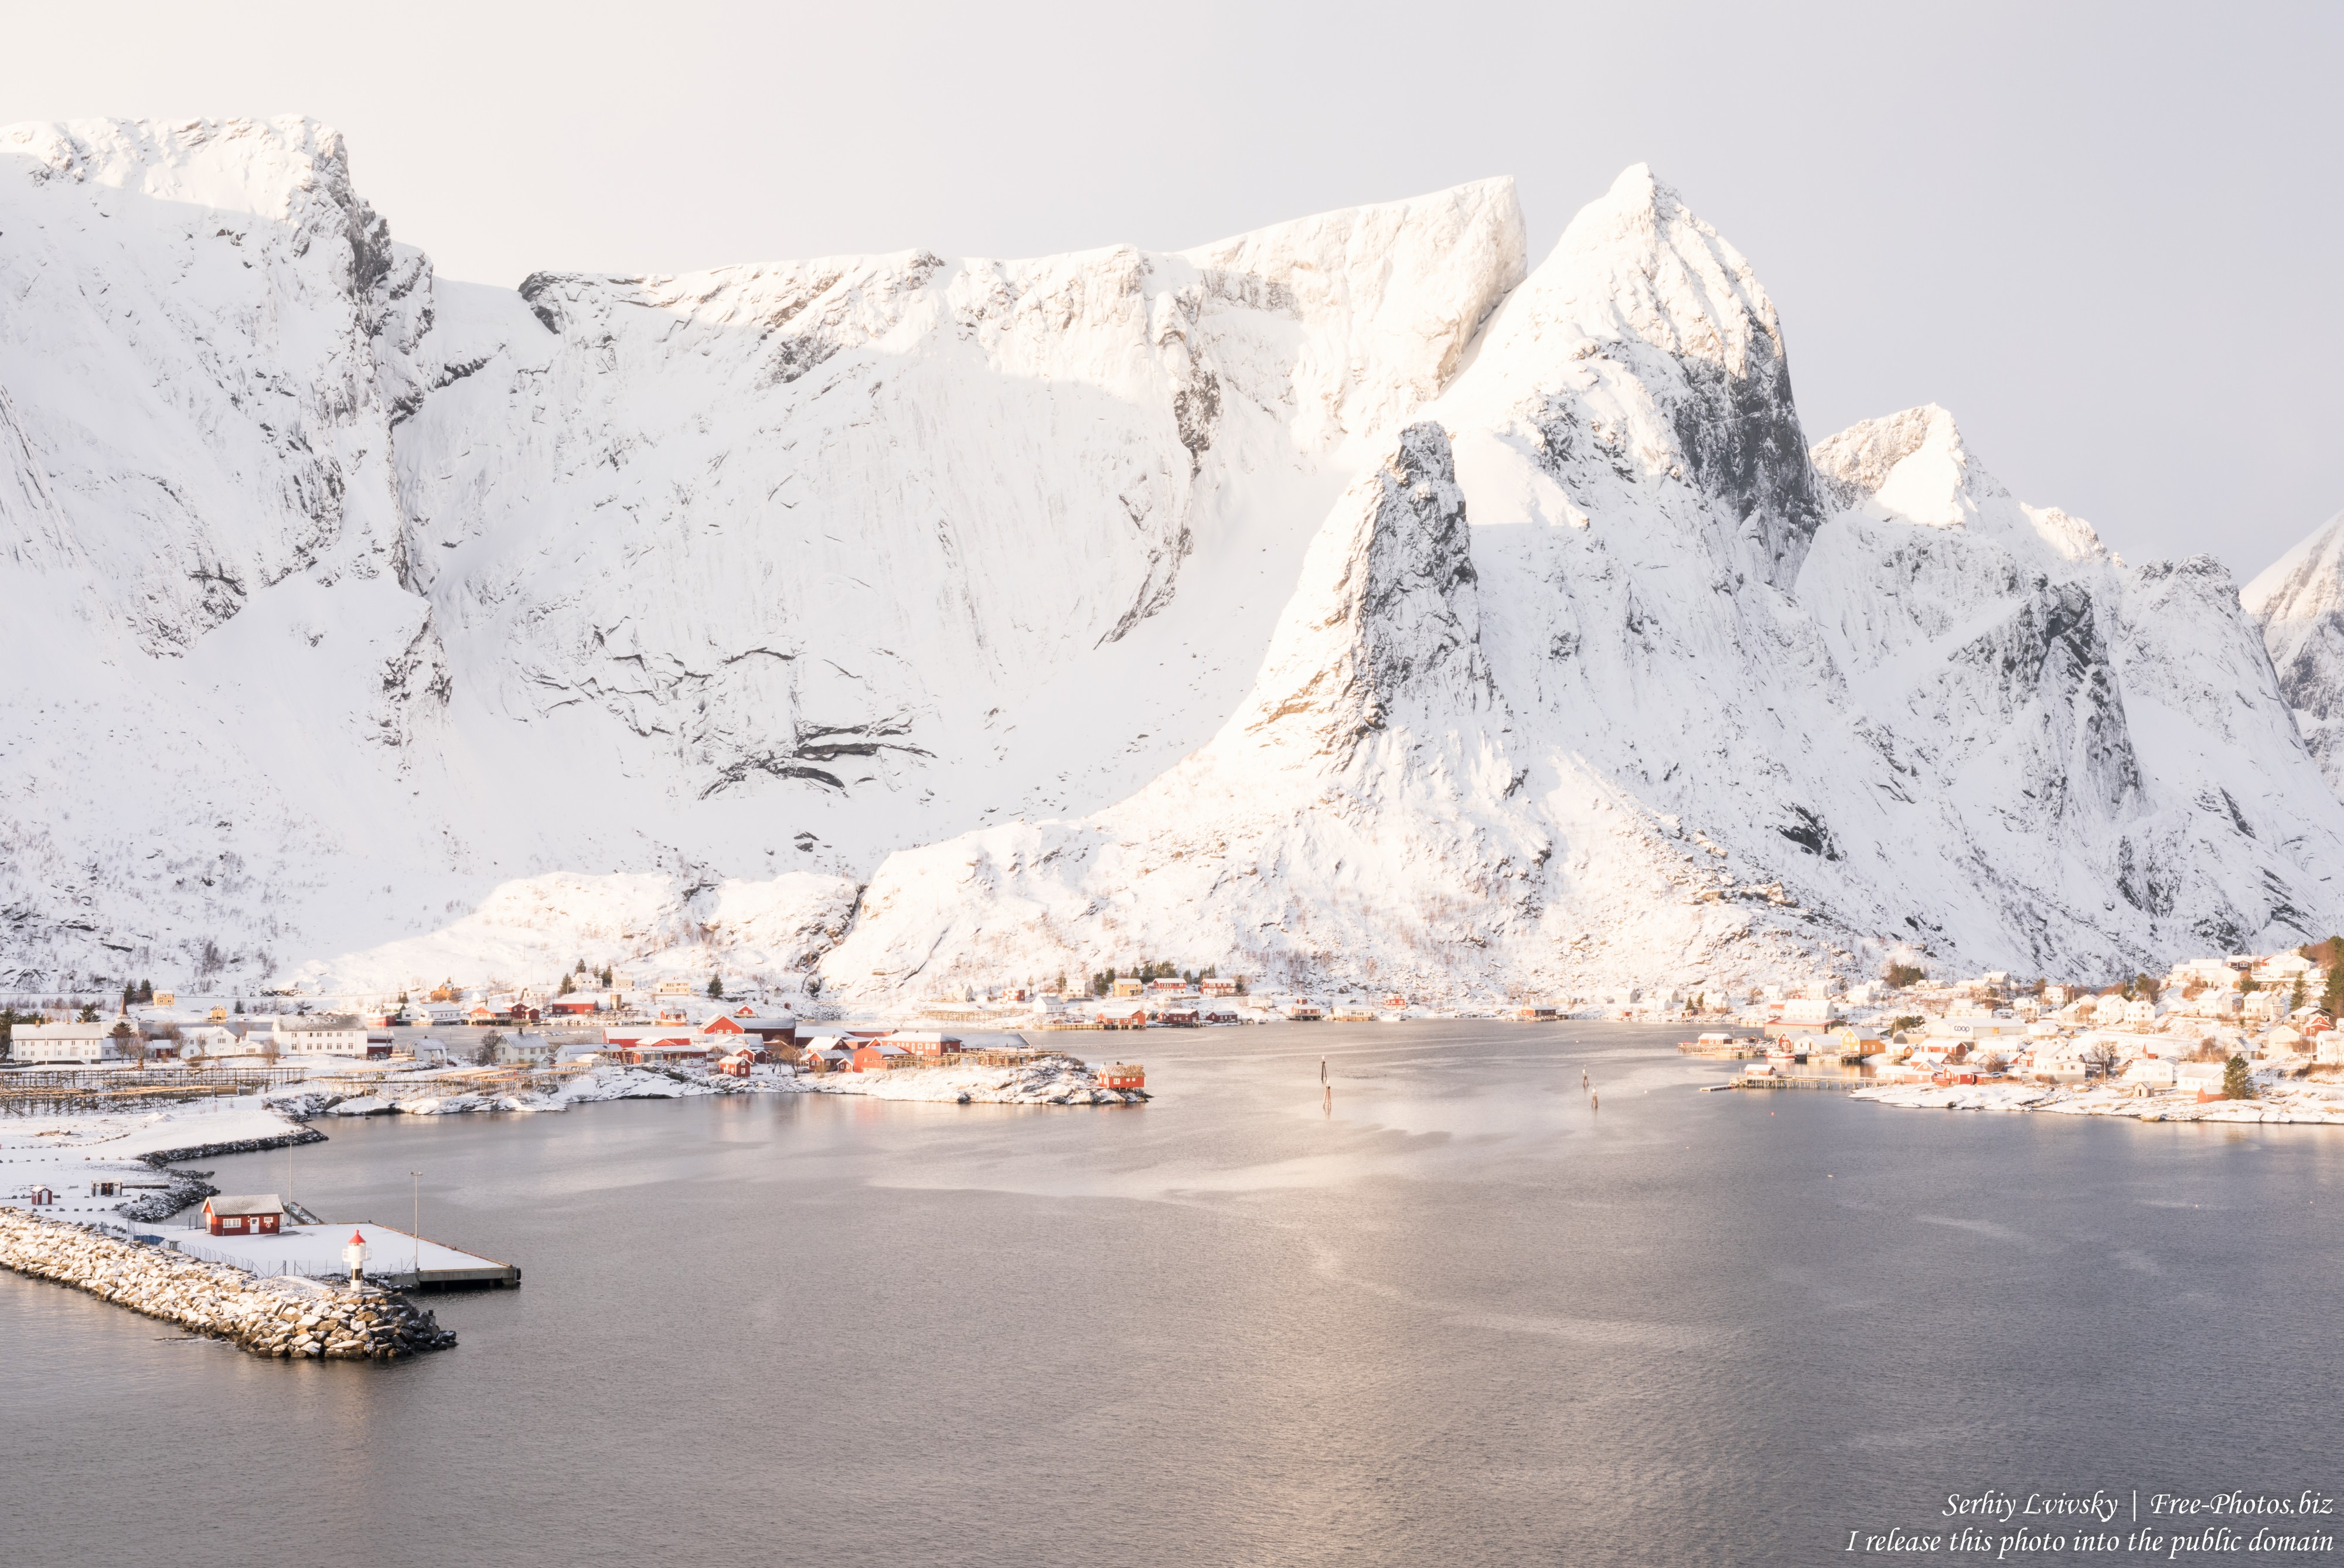 Sakrisoy and surroundings, Norway, in February 2020 by Serhiy Lvivsky, picture 29